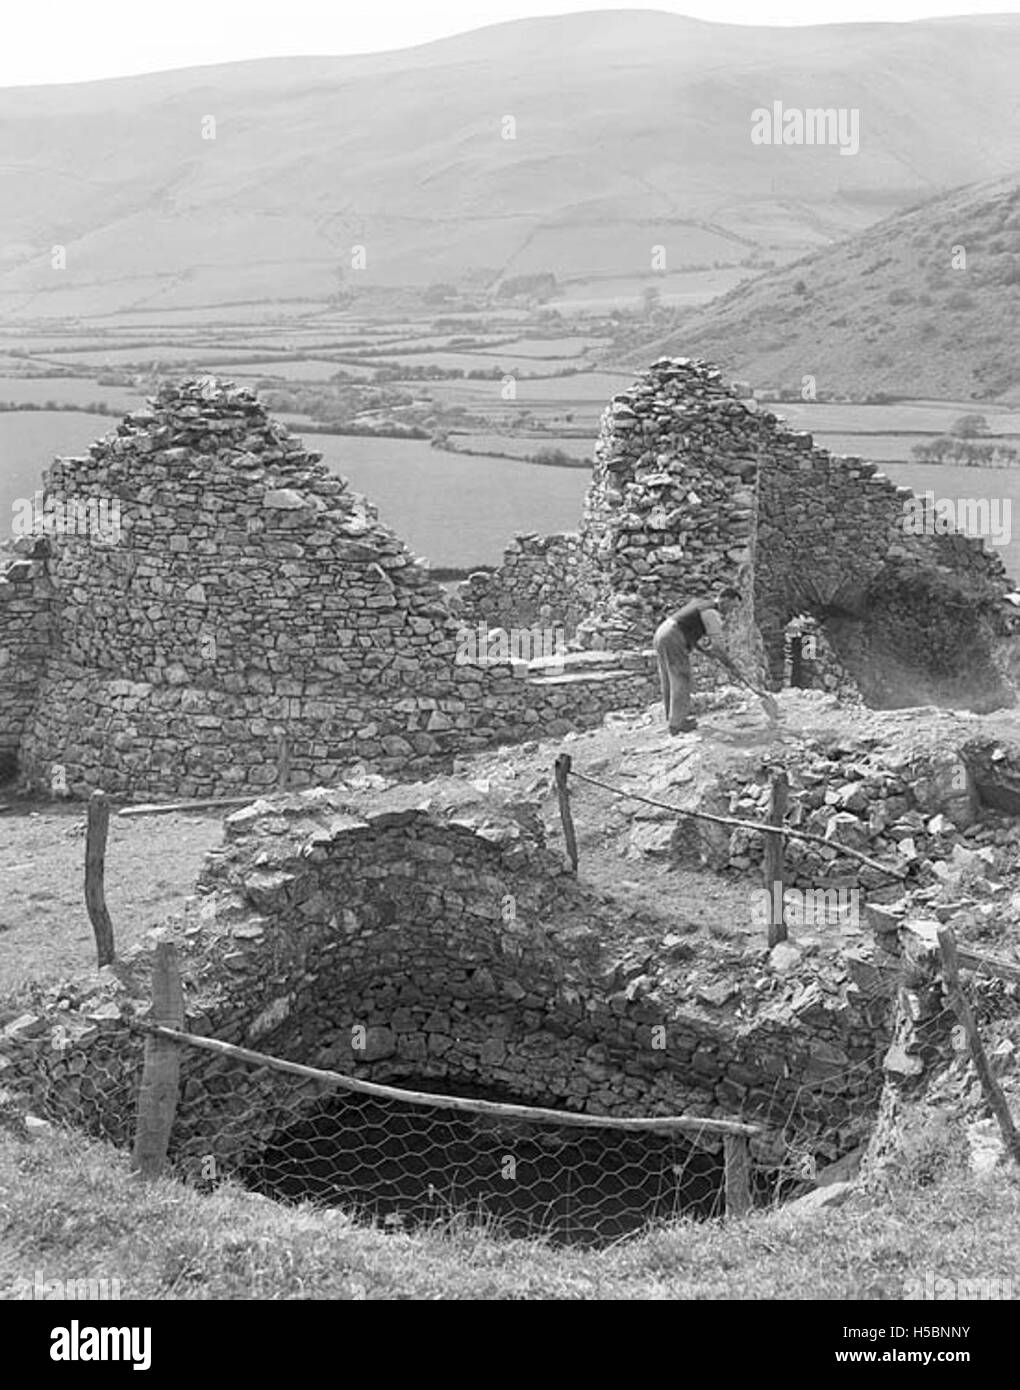 Re-discovery of Castell y Bere in Llanfihangel-y-Pennant in the Dysynni Valley Stock Photo